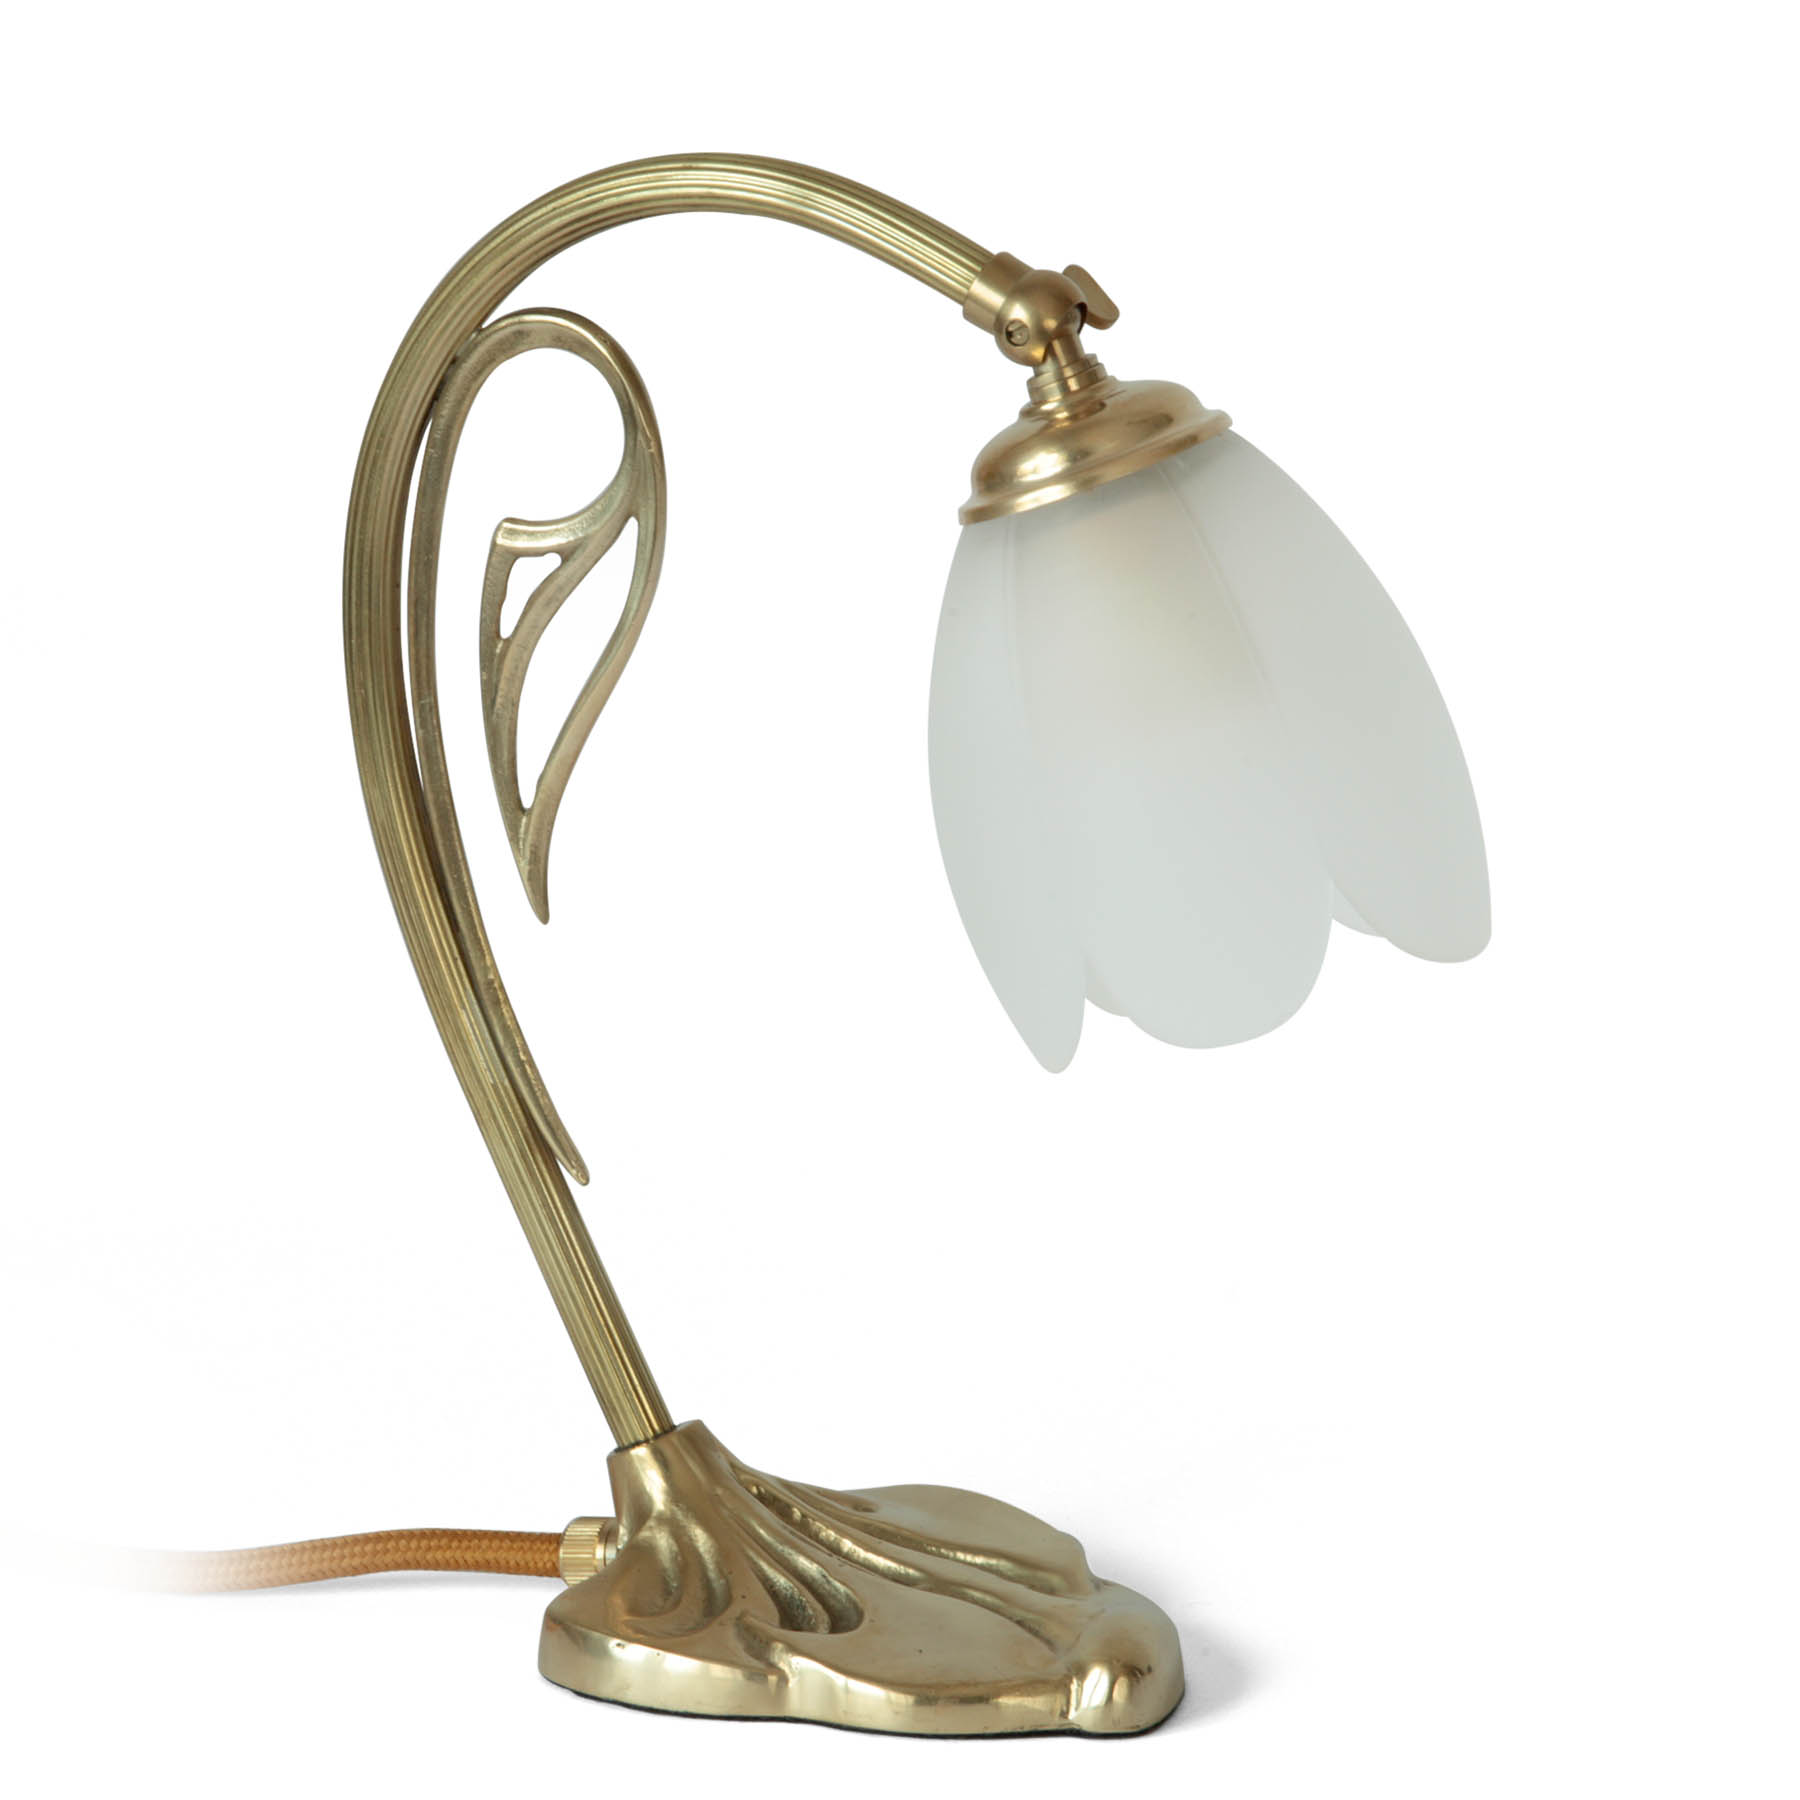 Small Art Nouveau Table Lamp With Blossom Shaped Glass Shade